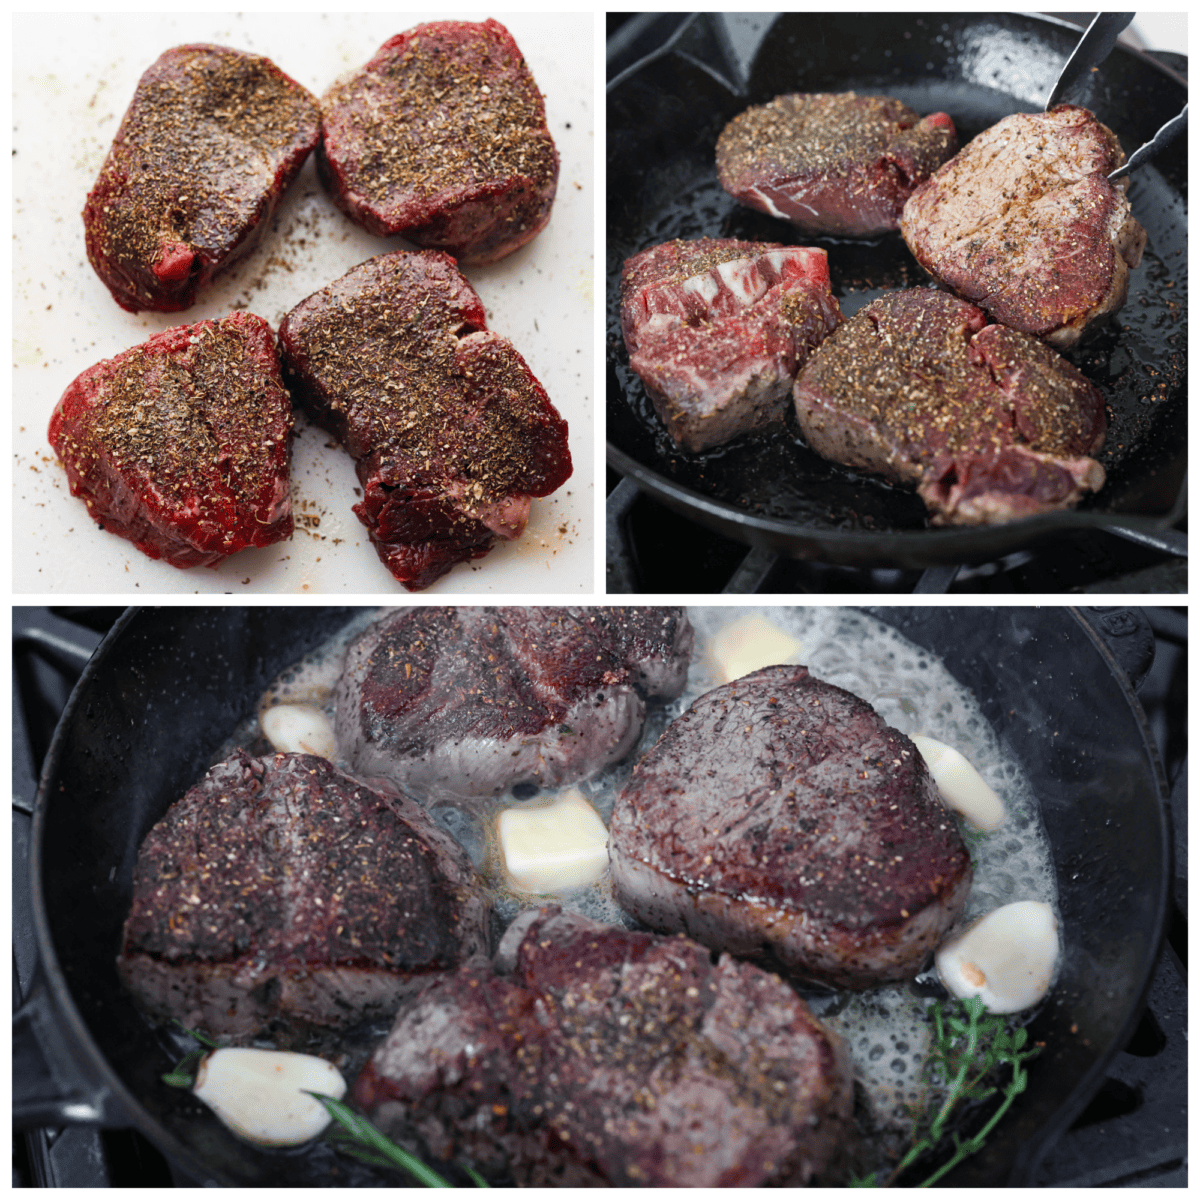 First photo of seasoned filets. Second photo of the filets searing in a pan. Third photo of the butter, garlic, and herbs added to the skillet.